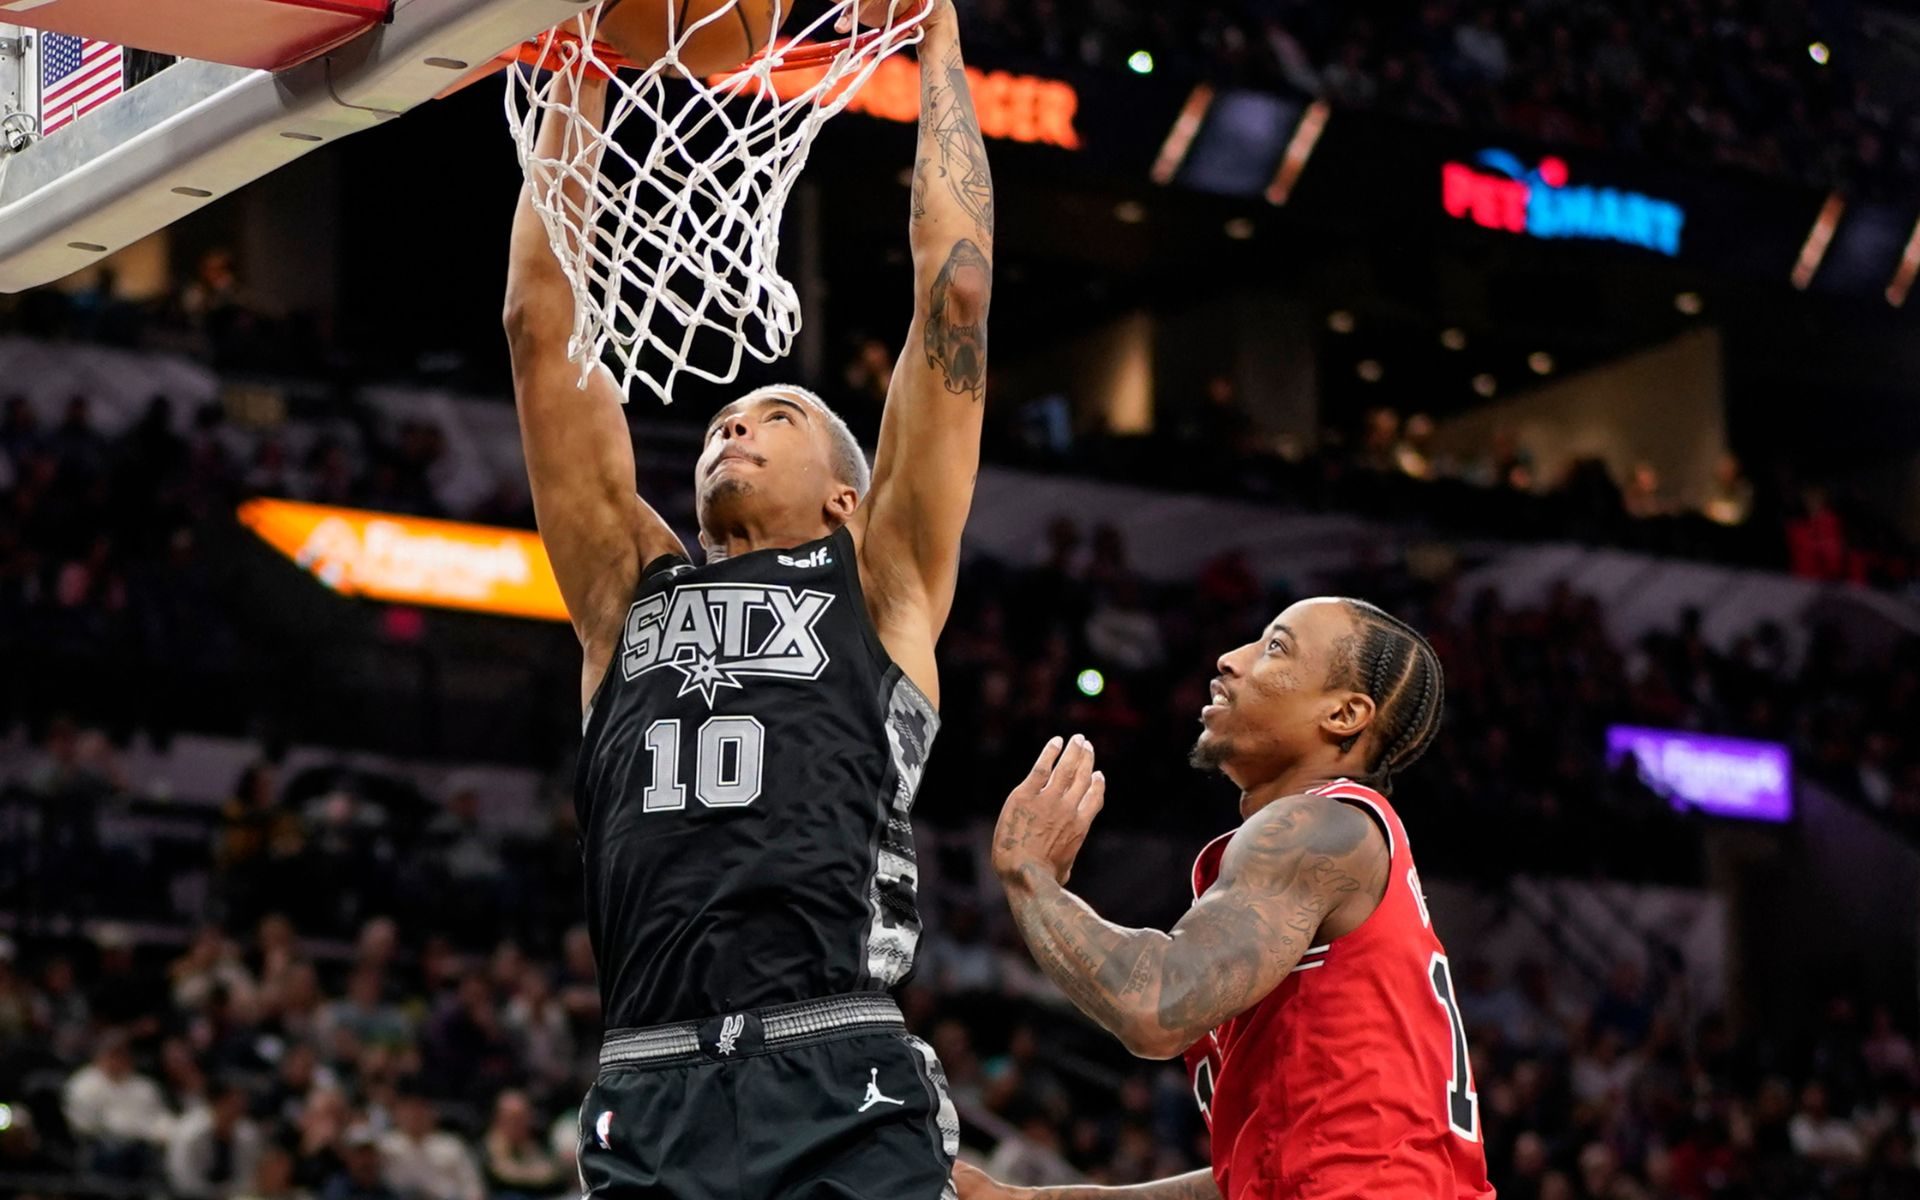 Spurs spoil DeRozan’s 20,000-point milestone with win over Bulls